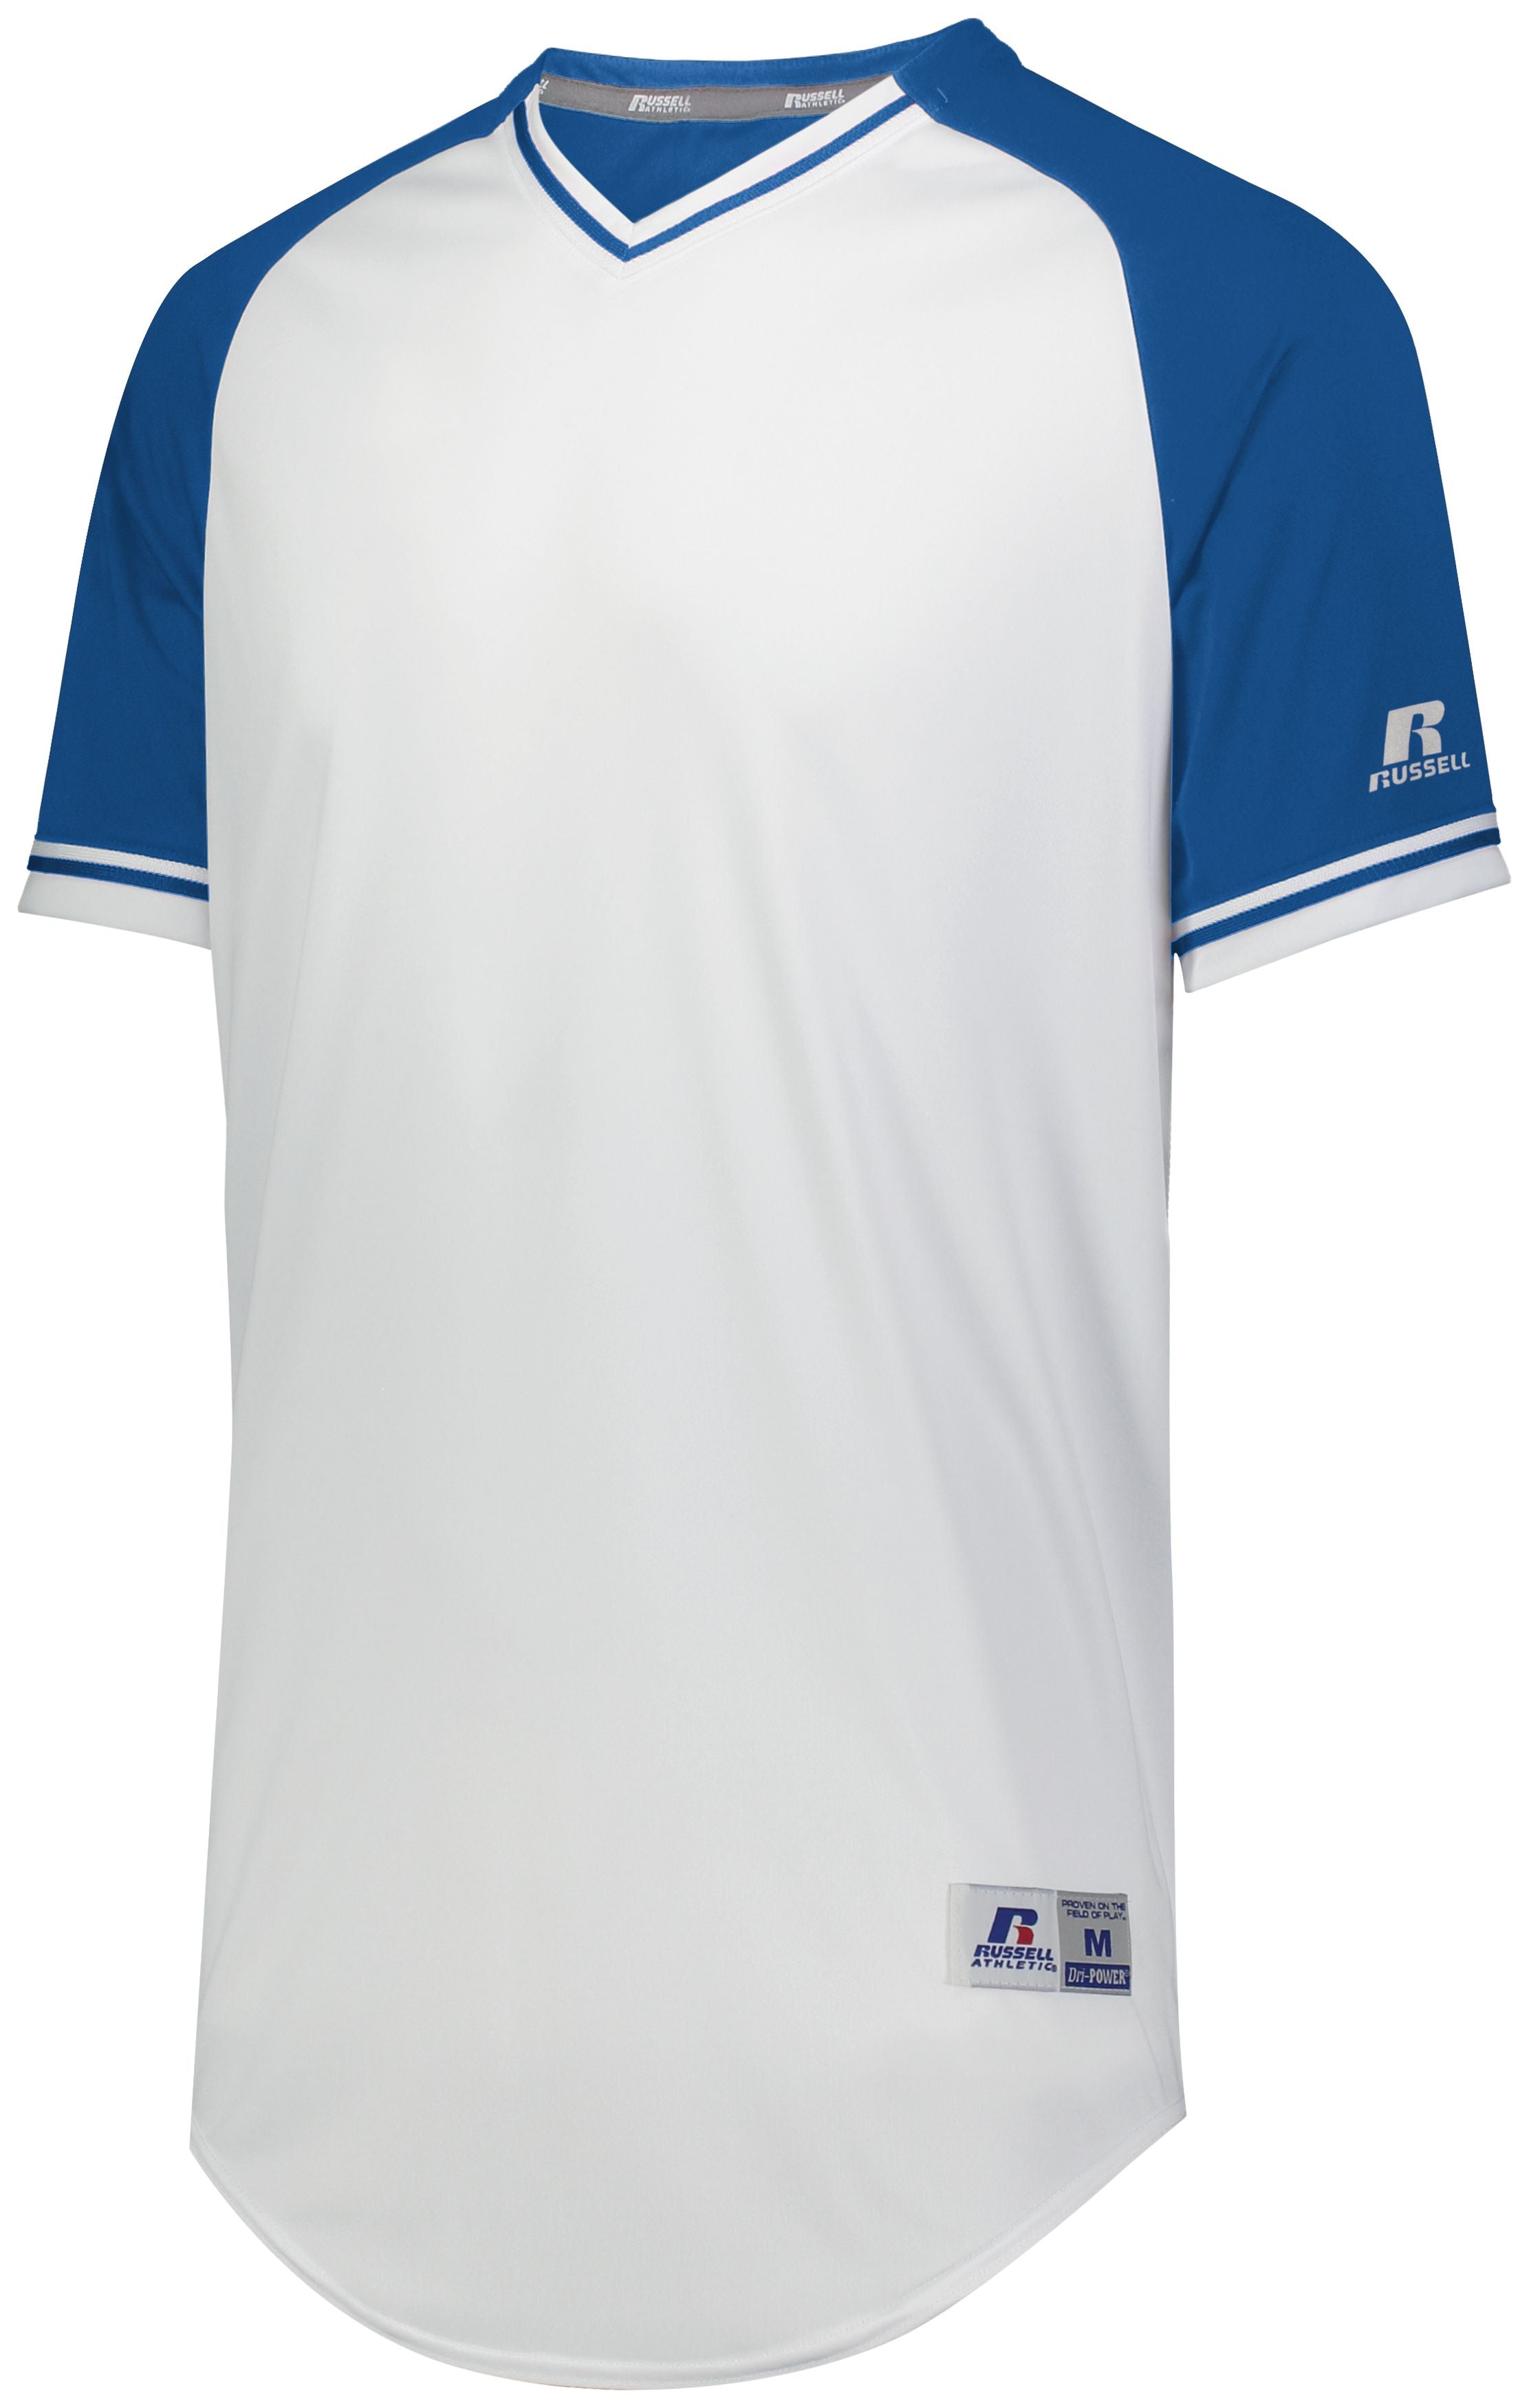 Russell Athletic Youth Classic V-Neck Jersey in White/Royal/White  -Part of the Youth, Youth-Jersey, Baseball, Russell-Athletic-Products, Shirts, All-Sports, All-Sports-1 product lines at KanaleyCreations.com